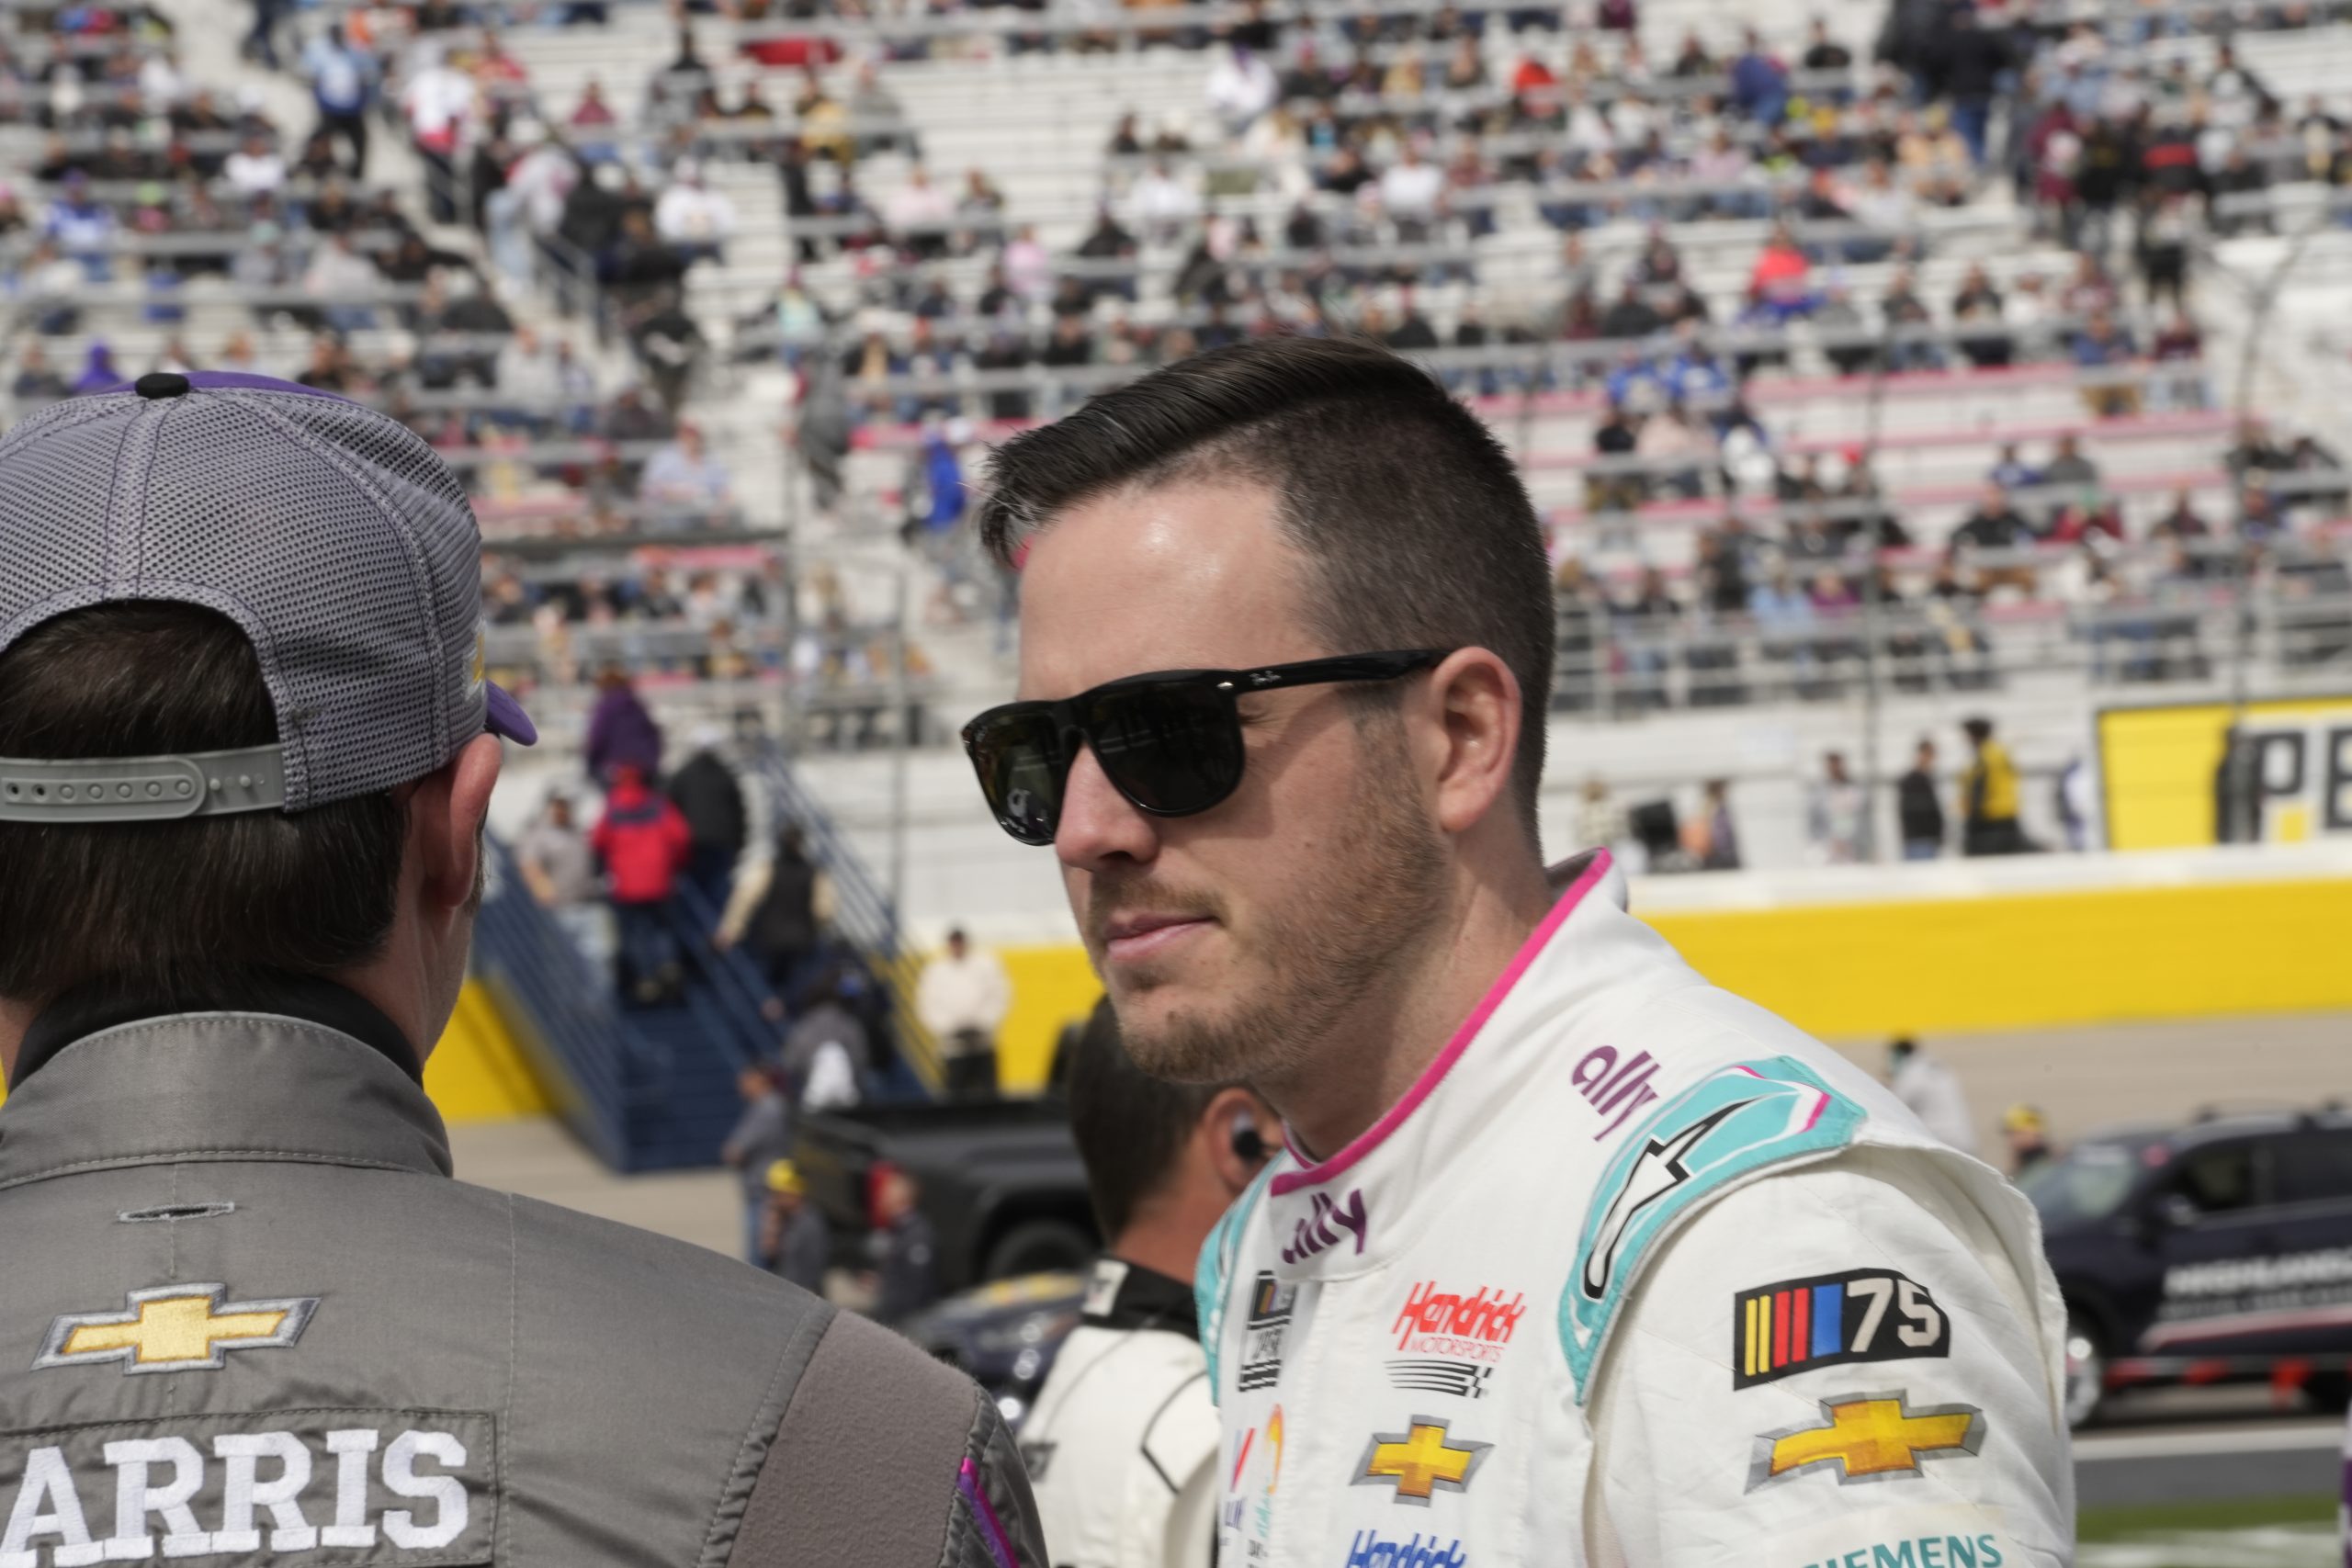 Alex Bowman's consistent start continued in Sunday's Pennzoil 400 at Las Vegas. (Photo: Christopher Vargas | The Podium Finish)